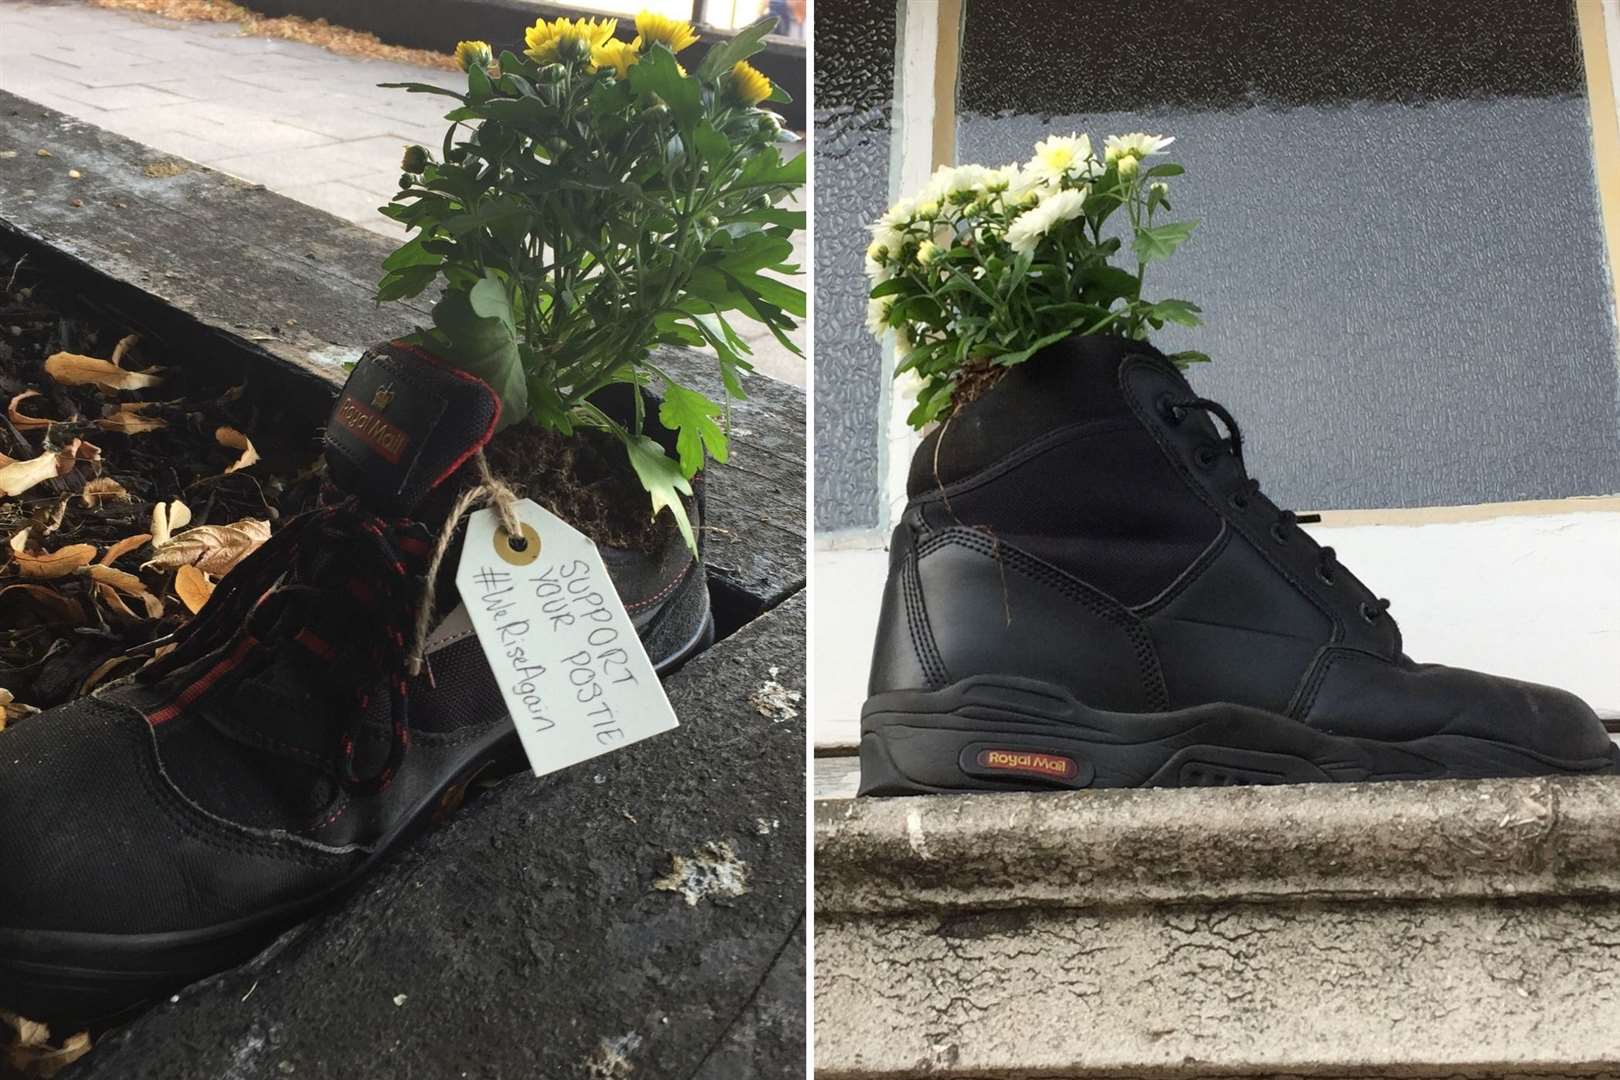 The flower-filled boots have been spotted in Canterbury (16205788)